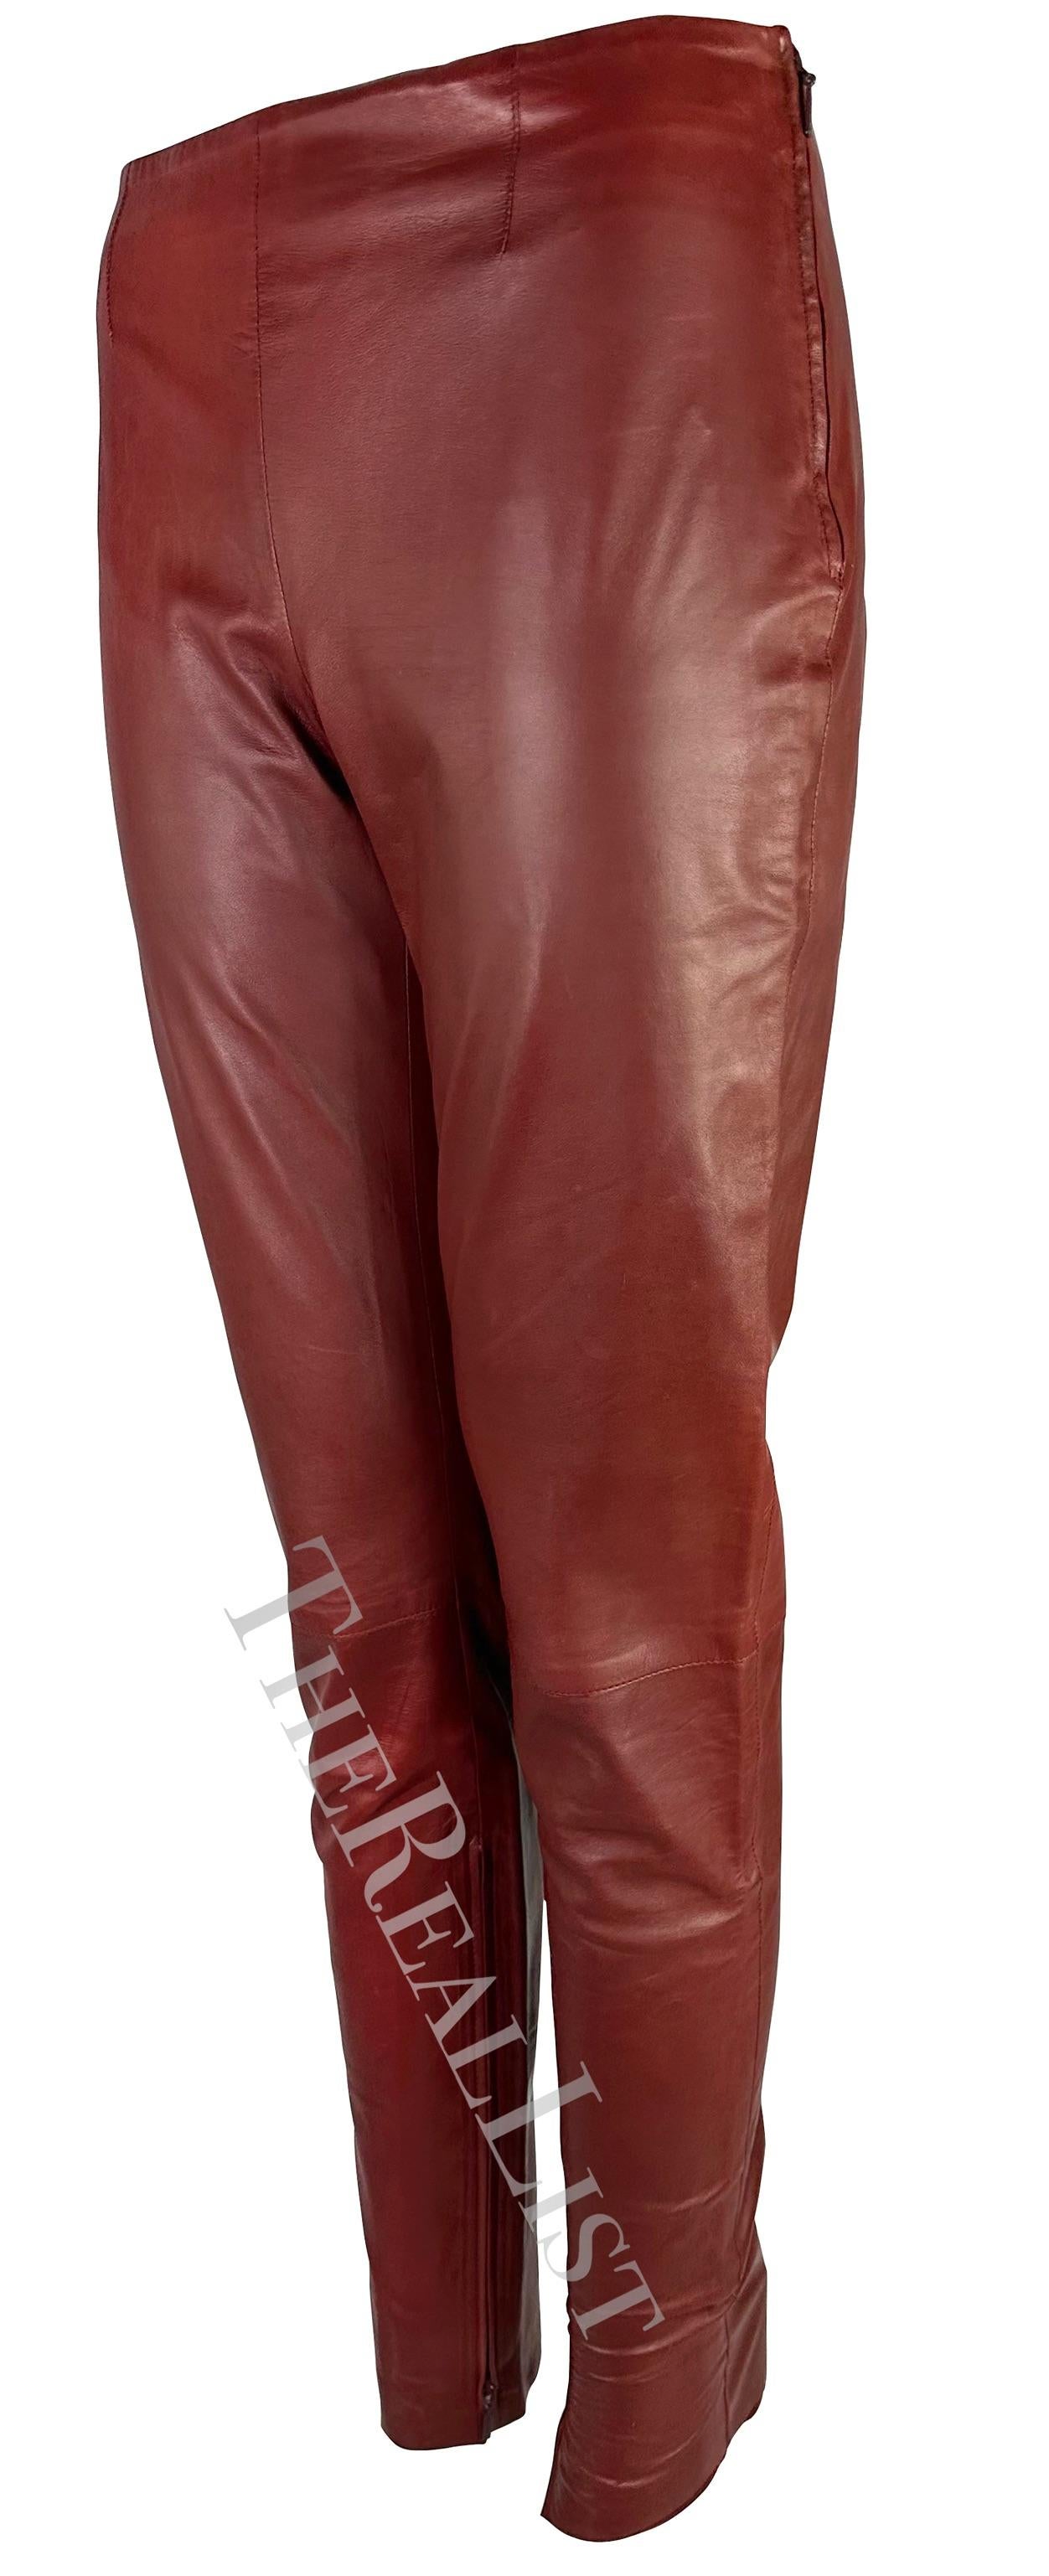 Presenting a fabulous pair of red leather Gucci pants, designed by Tom Ford. From the early 2000s, these pants are crafted entirely from lavish deep red leather. With a flattering high waist and sleek tapered cut, these pants present an exceptional